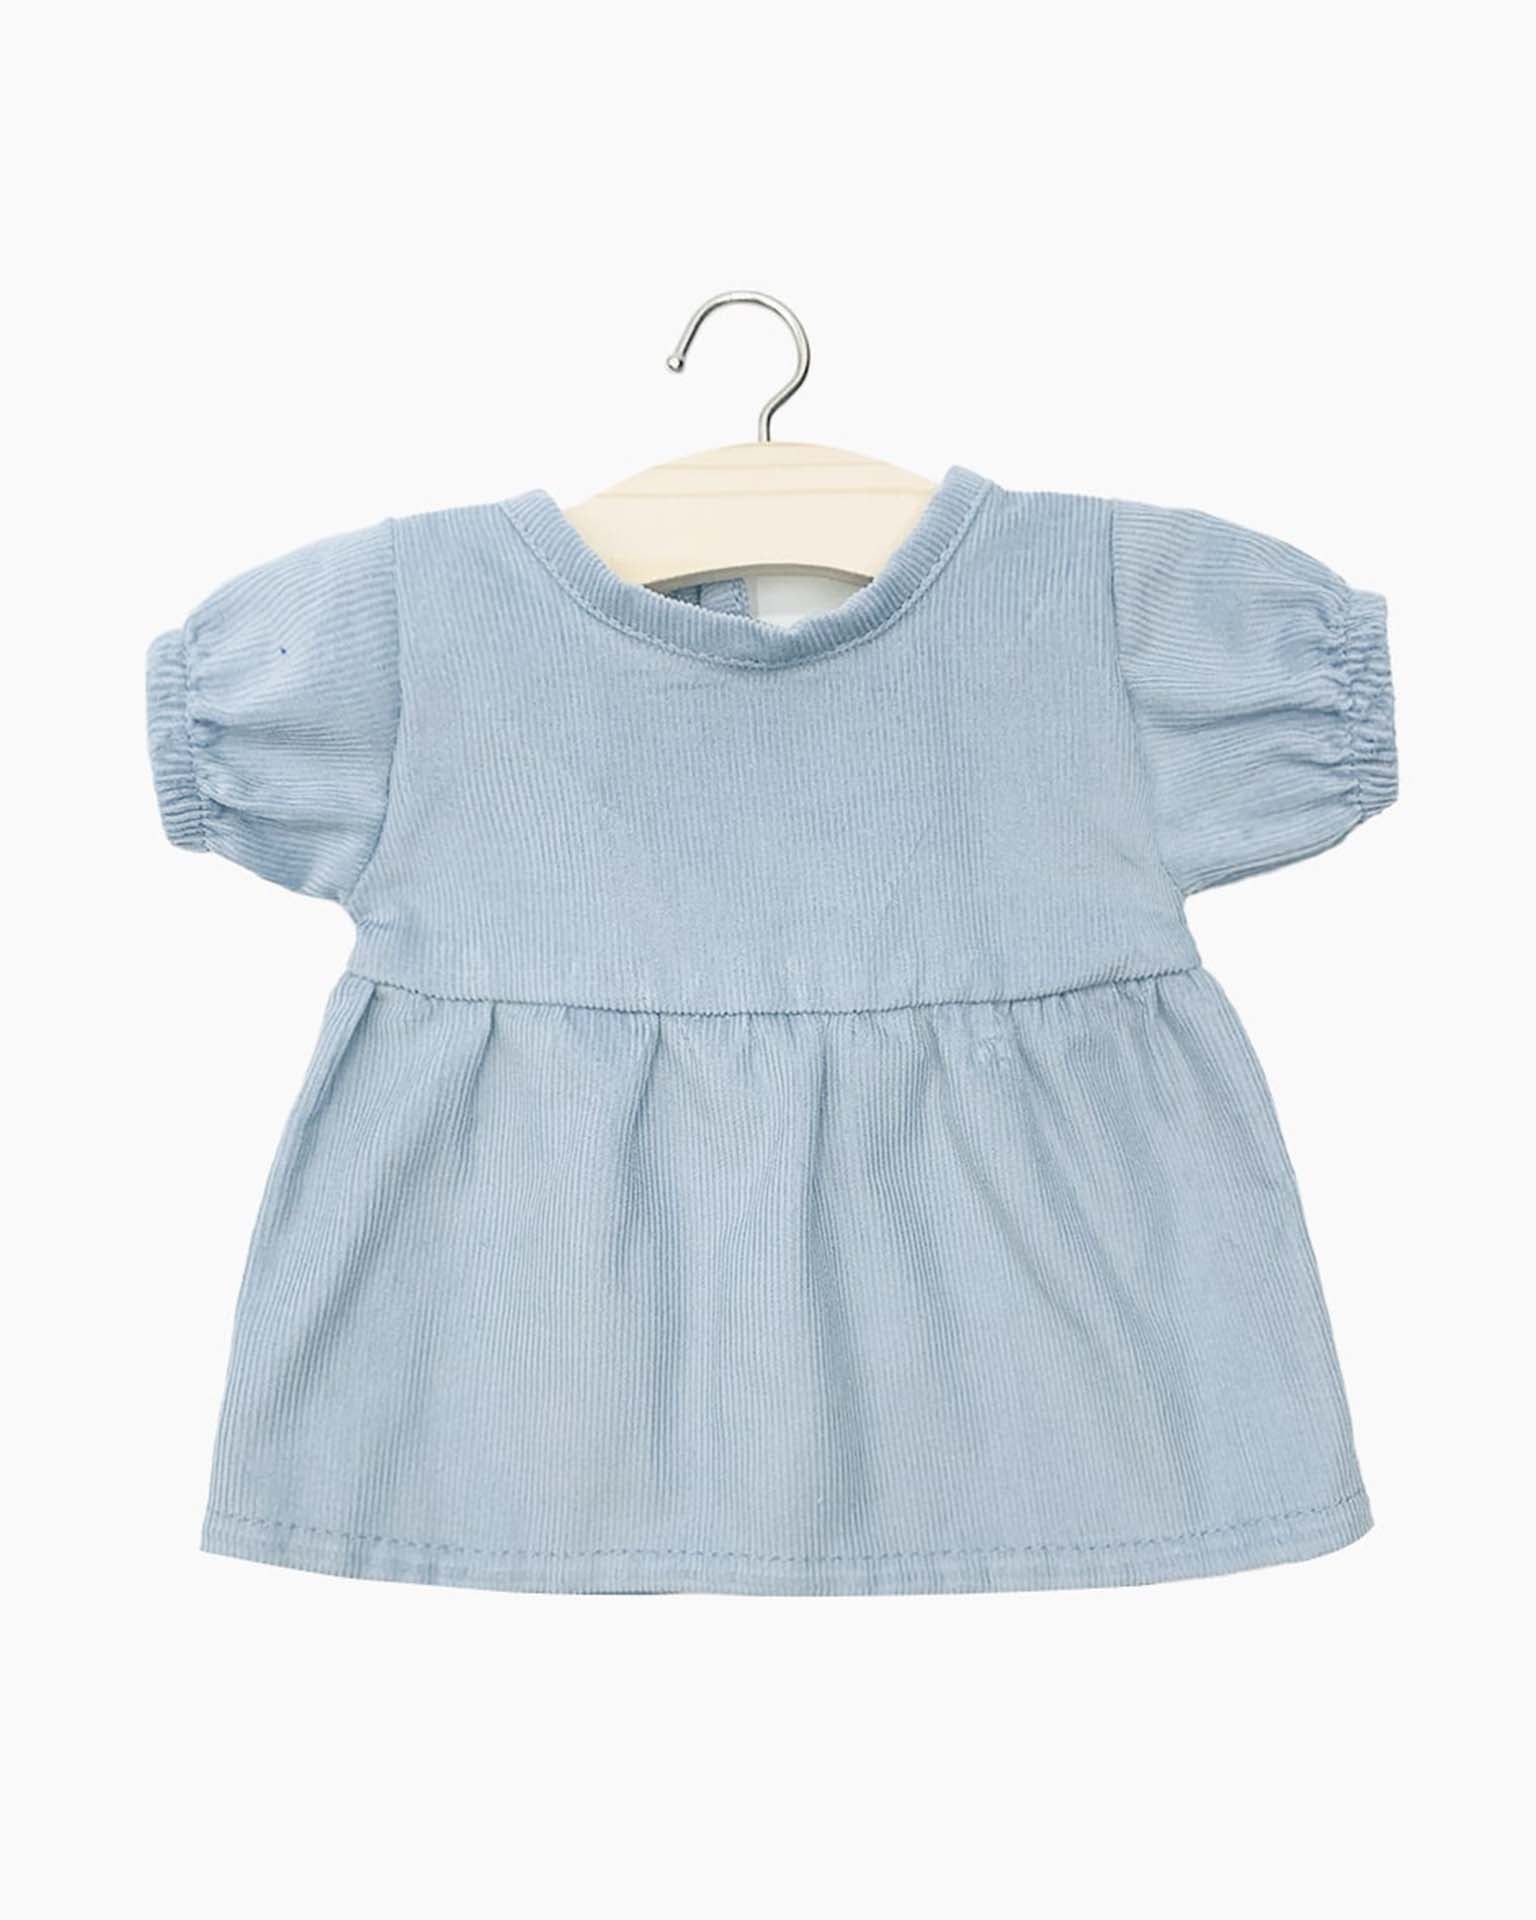 Little minikane play faustine dress with balloon sleeves in artic blue